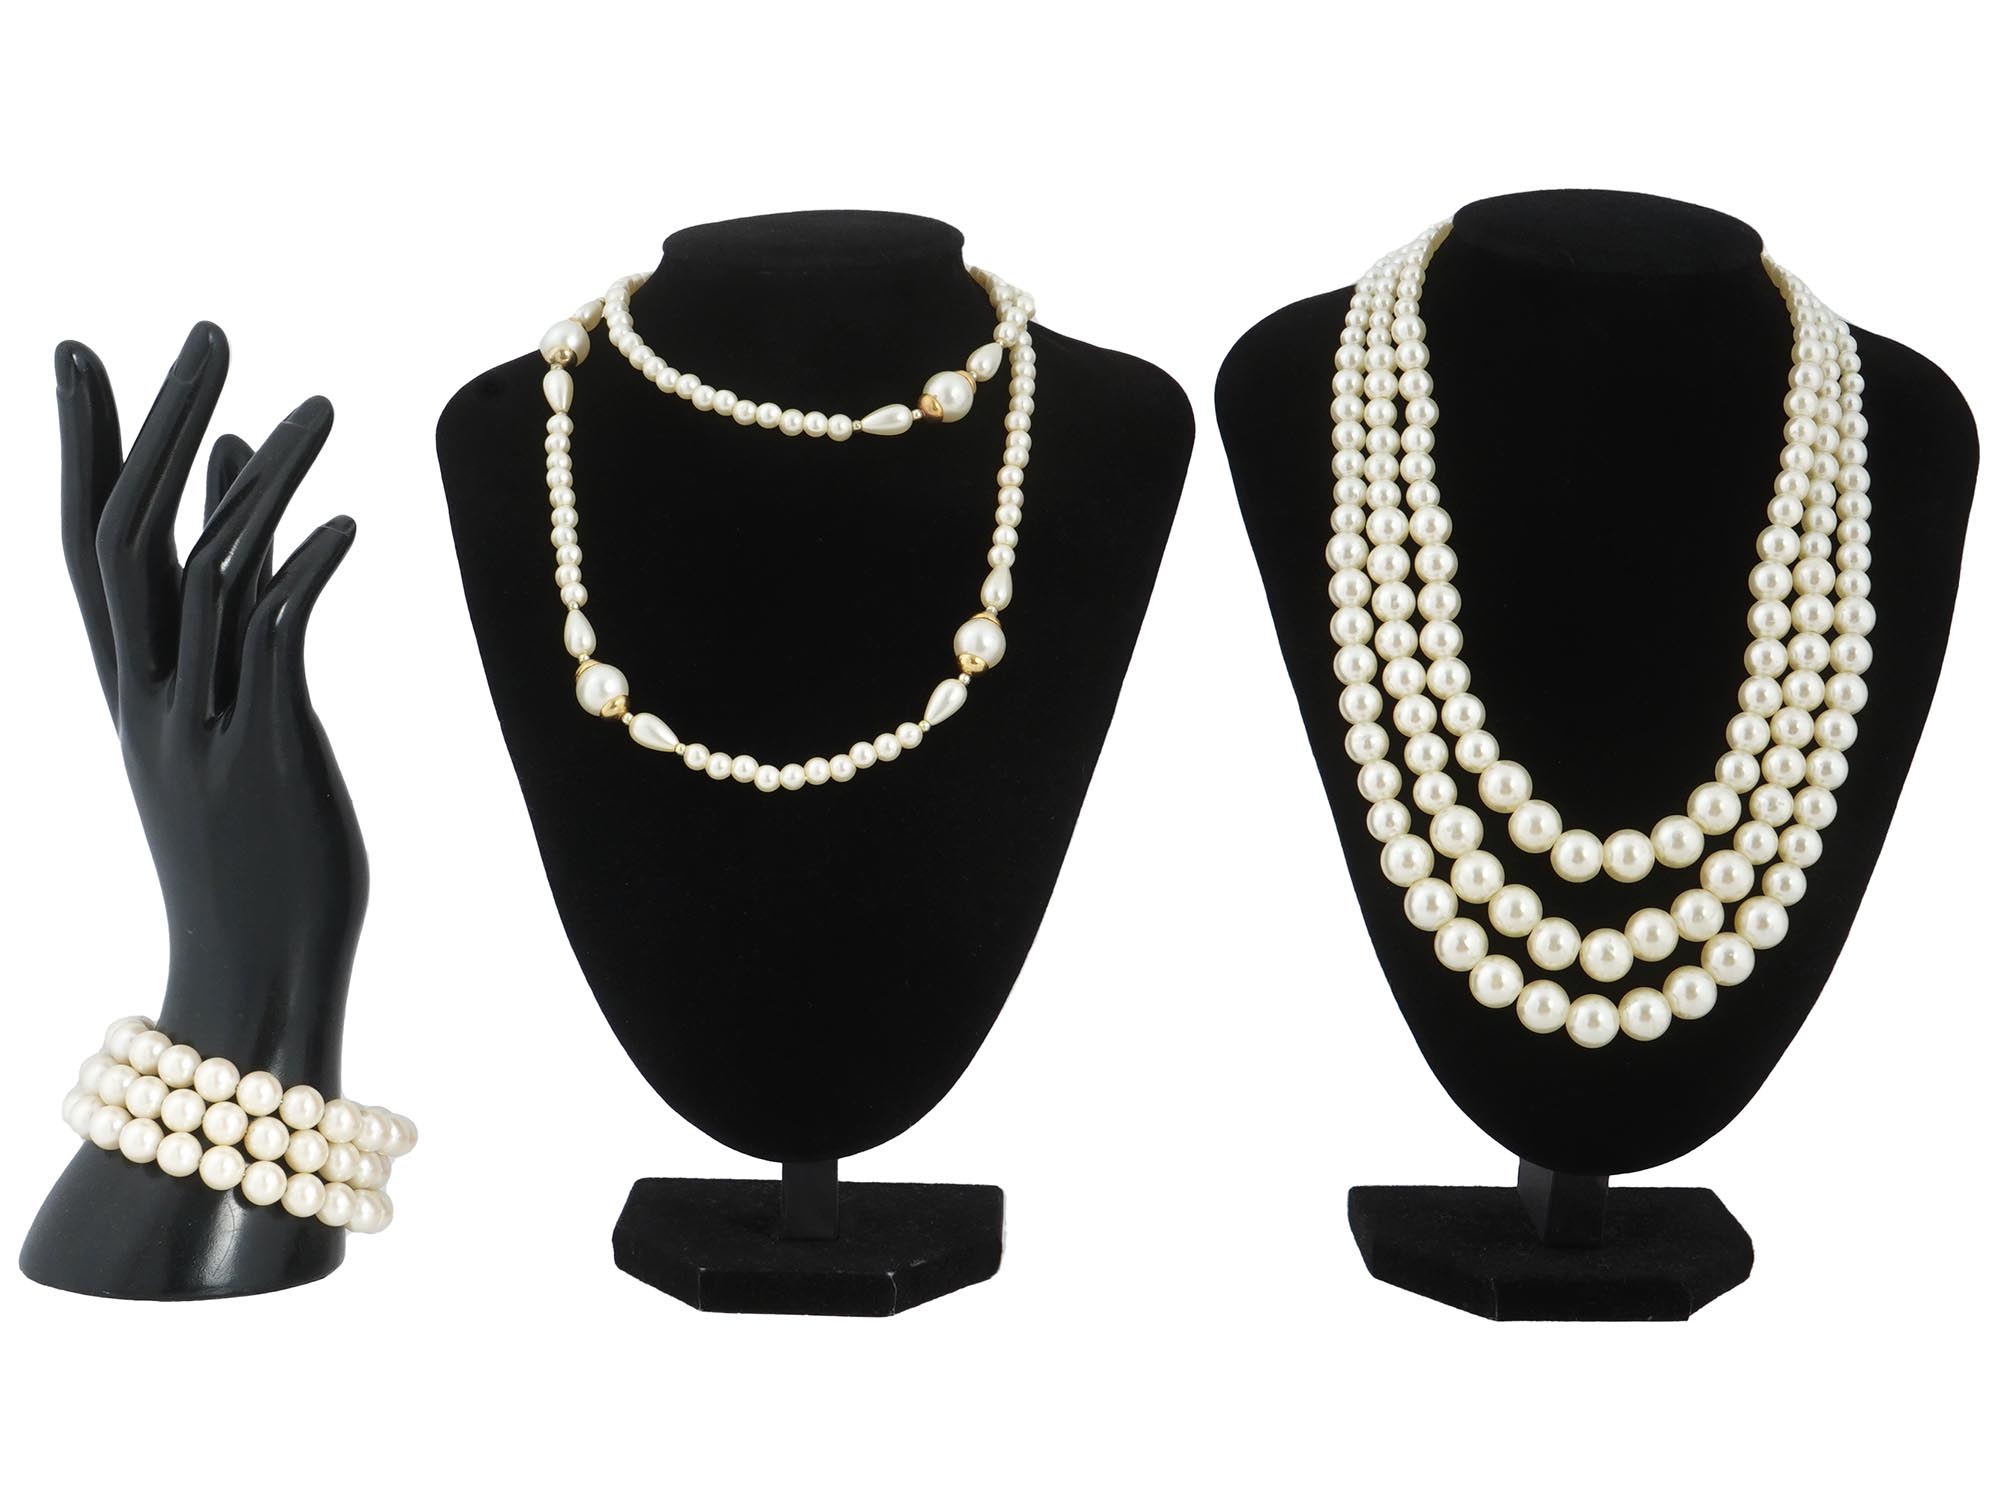 COSTUME JEWELRY SET OF FAUX PEARL NECKLACES BRACELET PIC-0